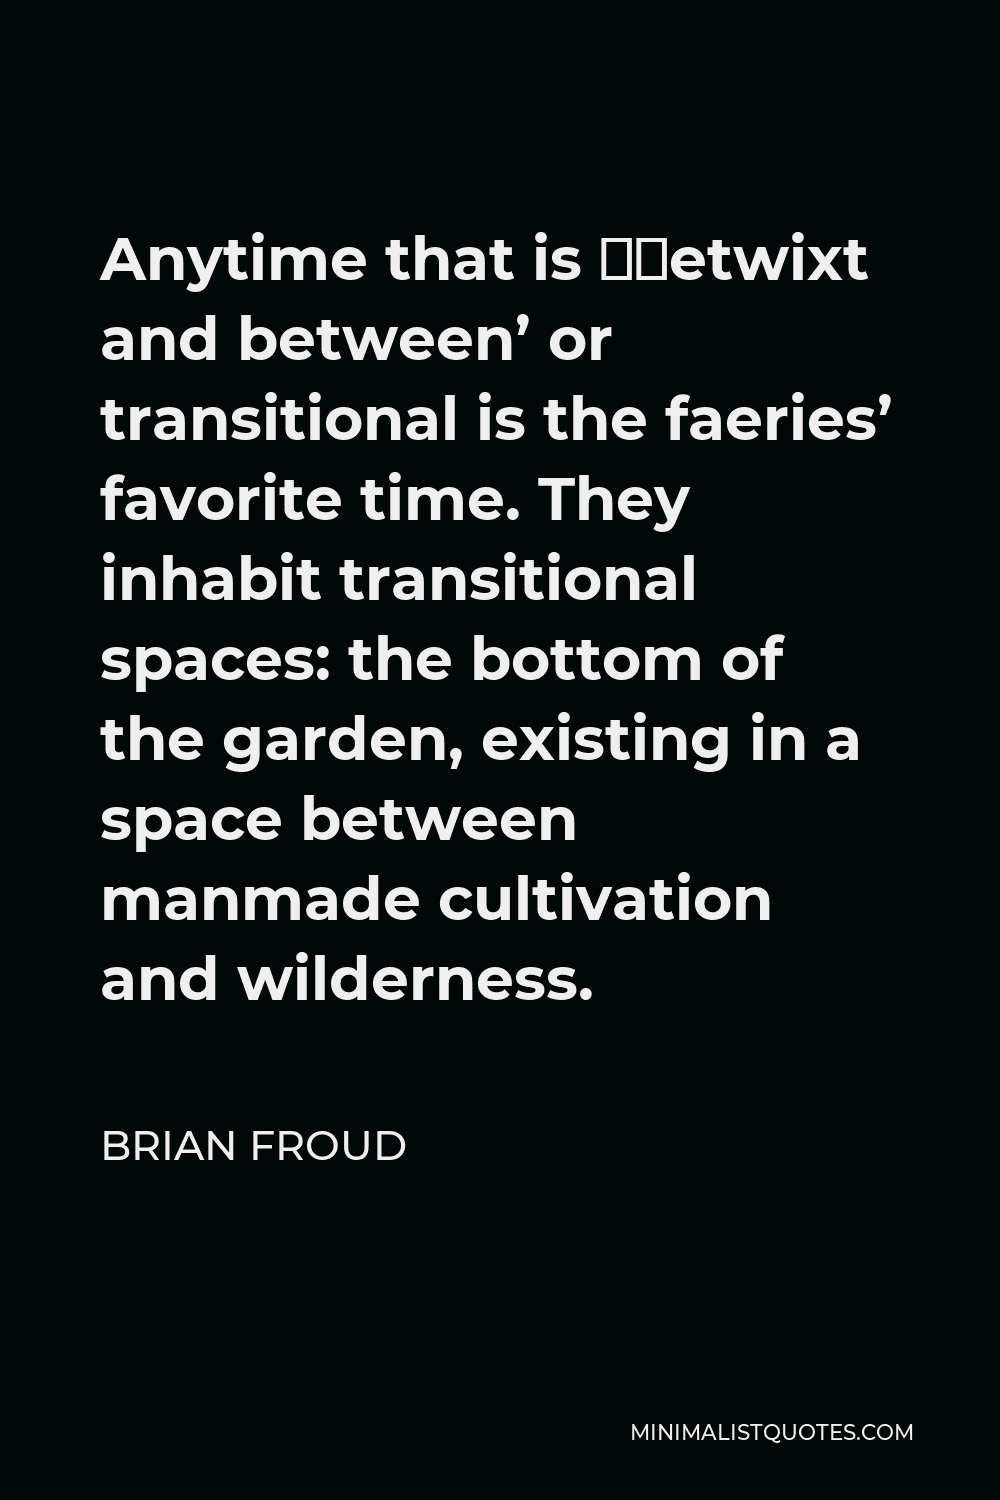 Brian Froud Quote - Anytime that is ‘betwixt and between’ or transitional is the faeries’ favorite time. They inhabit transitional spaces: the bottom of the garden, existing in a space between manmade cultivation and wilderness.